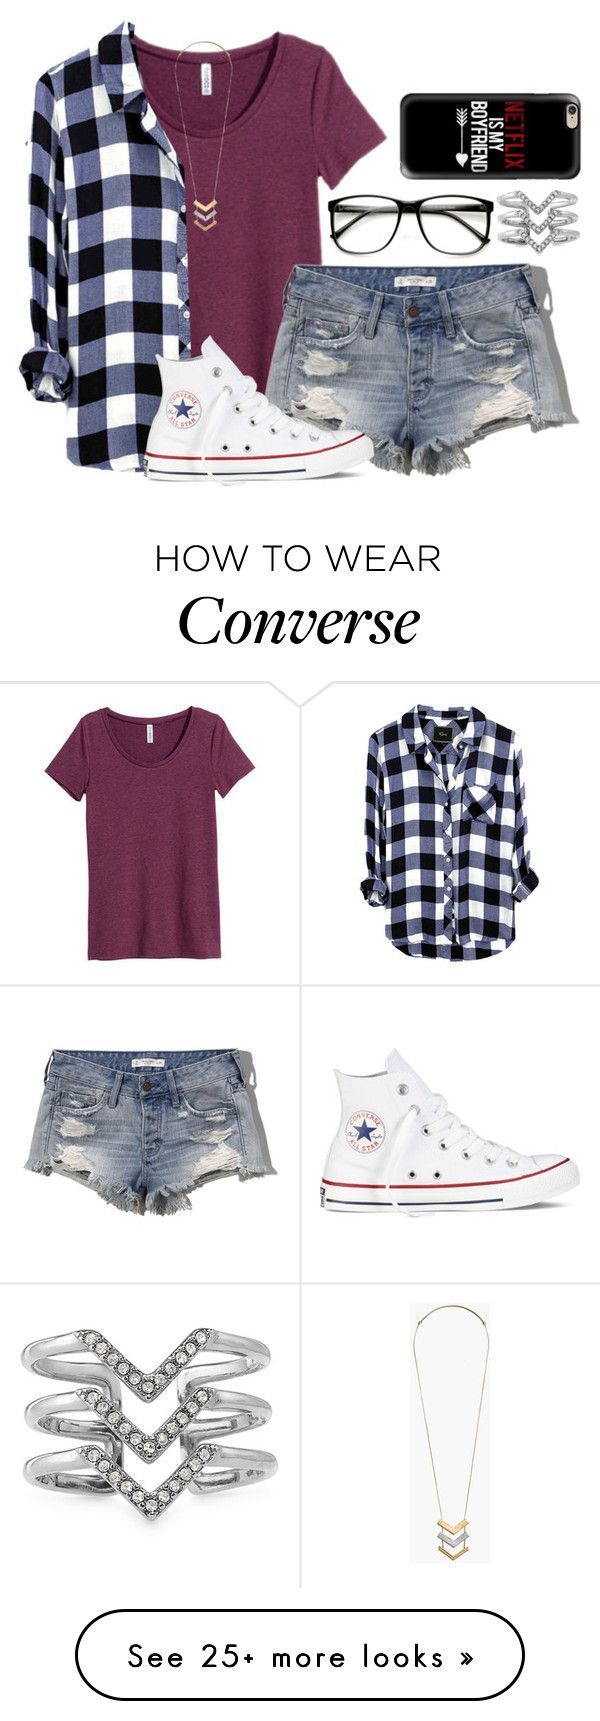 “11:11 wish (I wish for you btw)” by dejonggirls on Polyvore featuring H&M, Abercrombie & Fitch, Converse, Casetify, Stella & Dot,